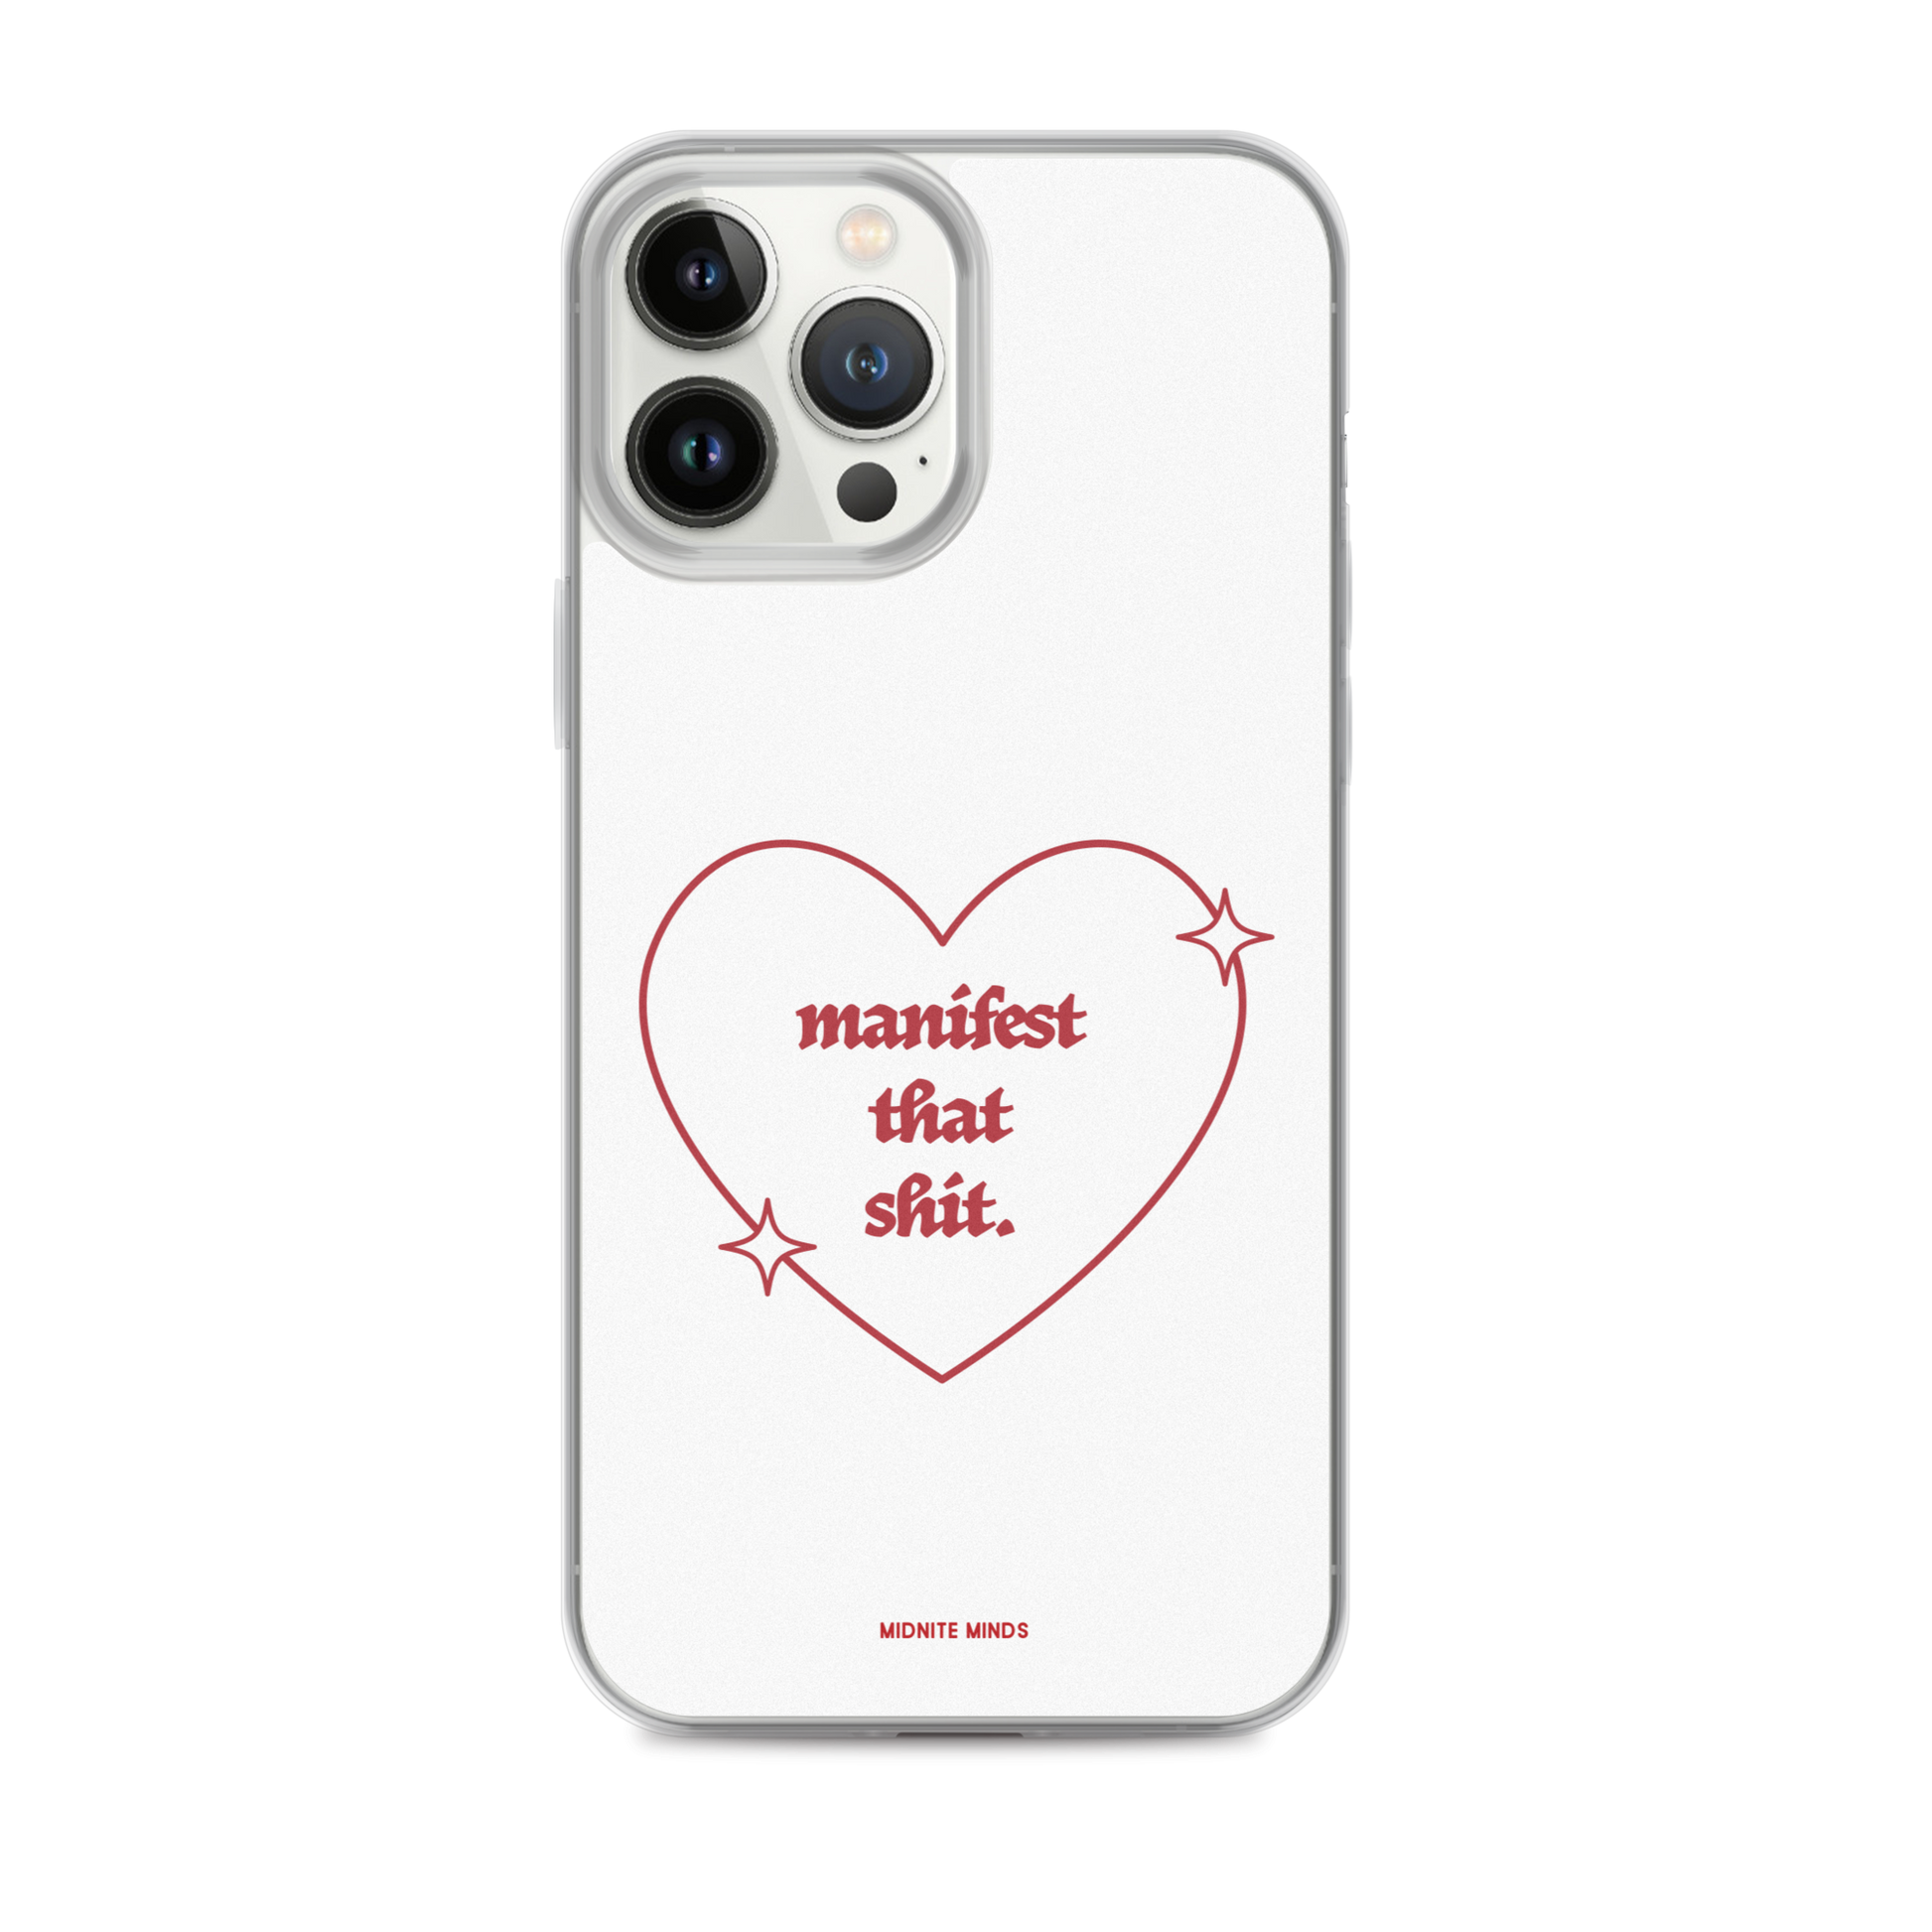 manifest that shit, heart iPhone case, manifestation, heart phone case, aesthetic phone case